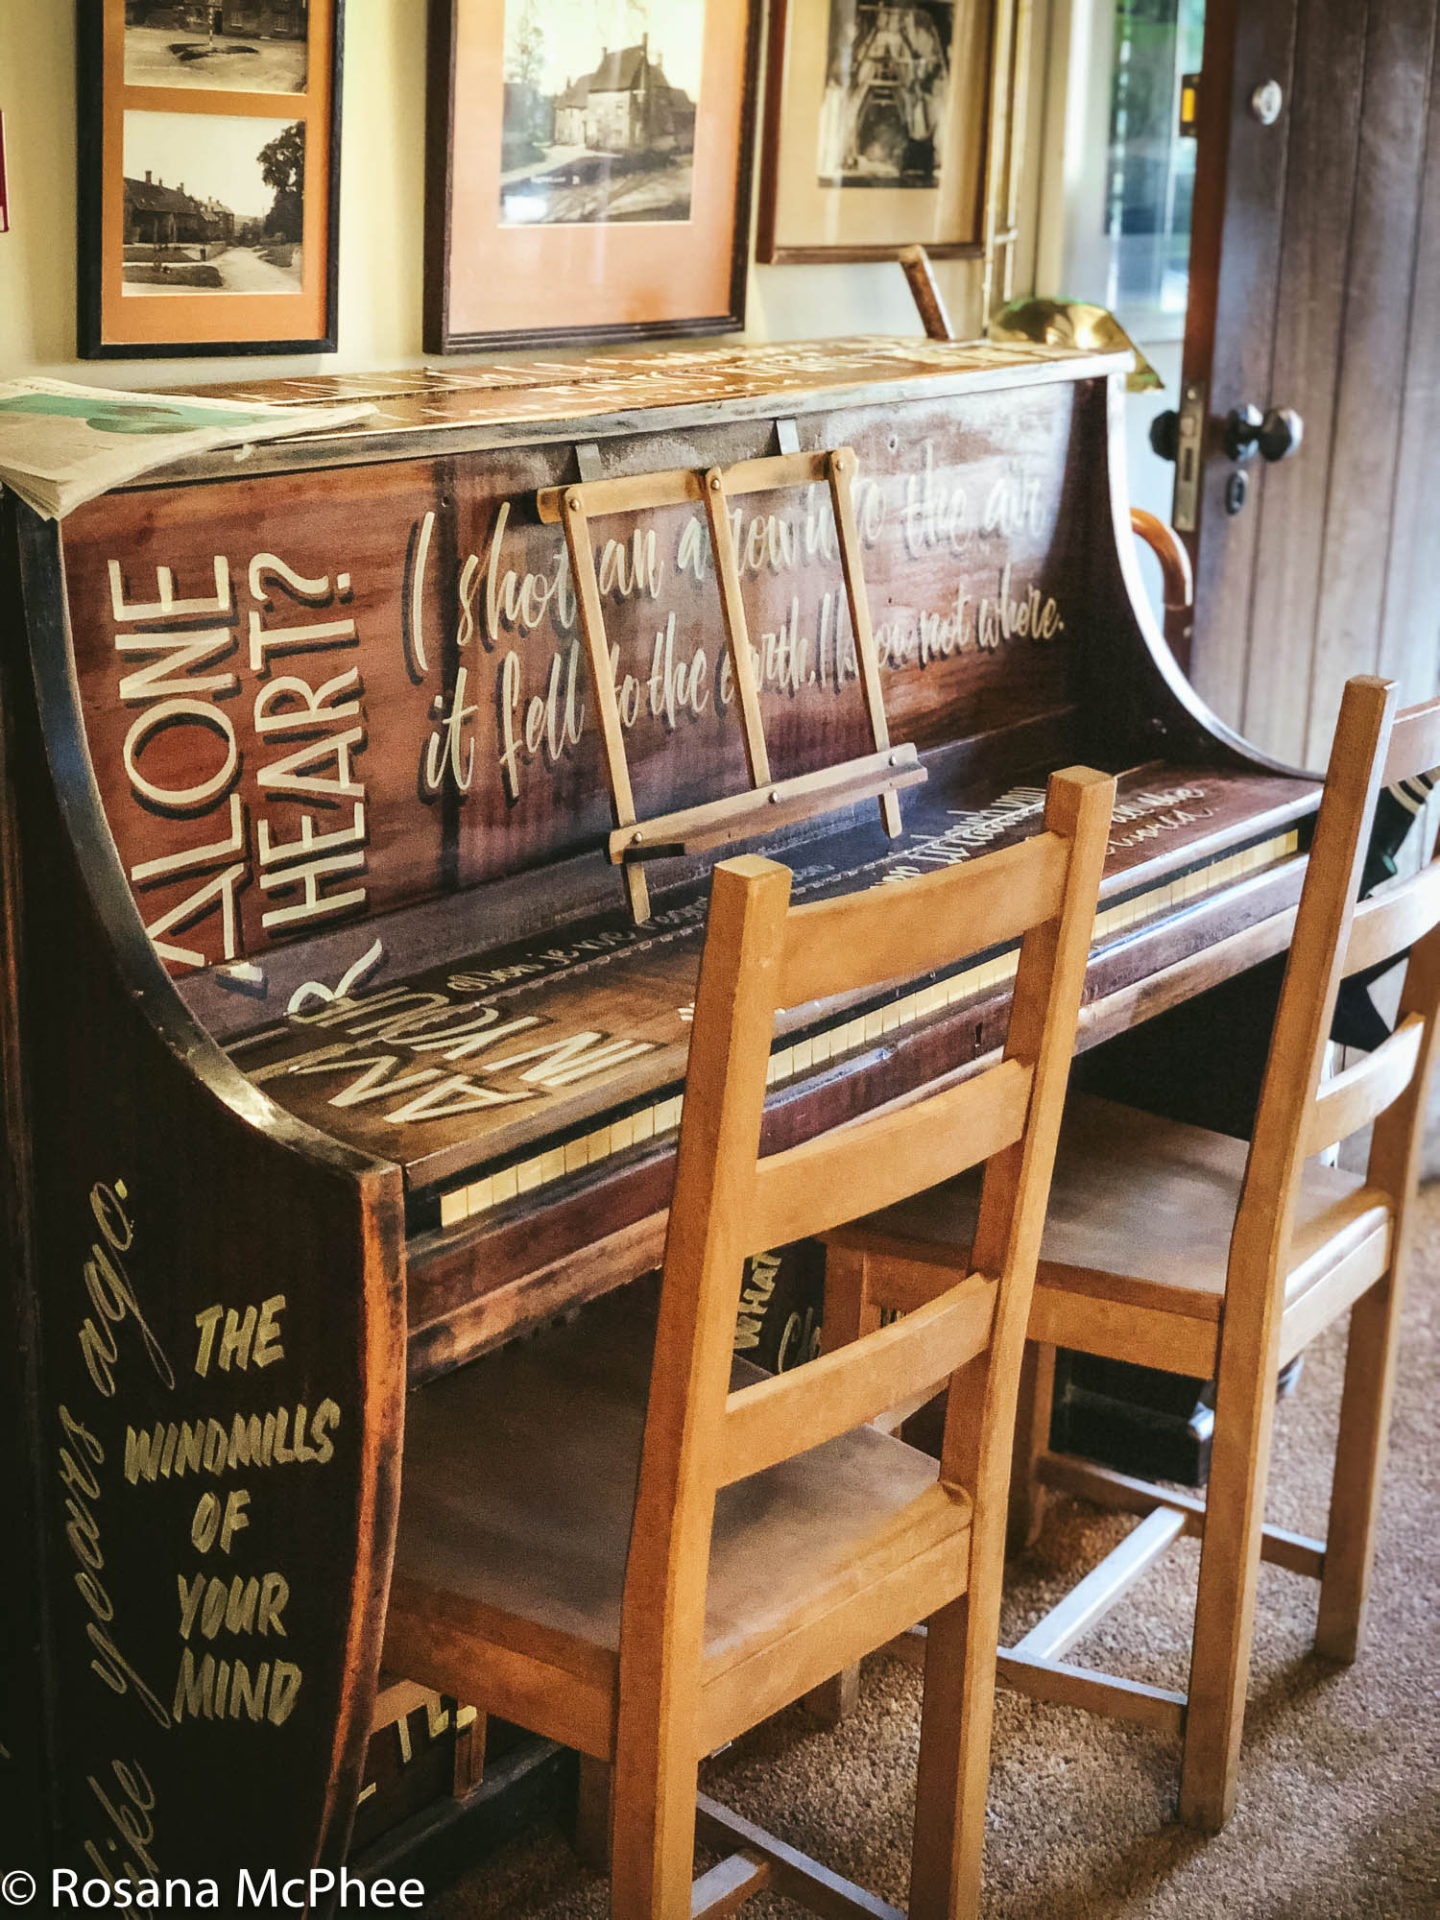  upright piano  at the Crown Inn